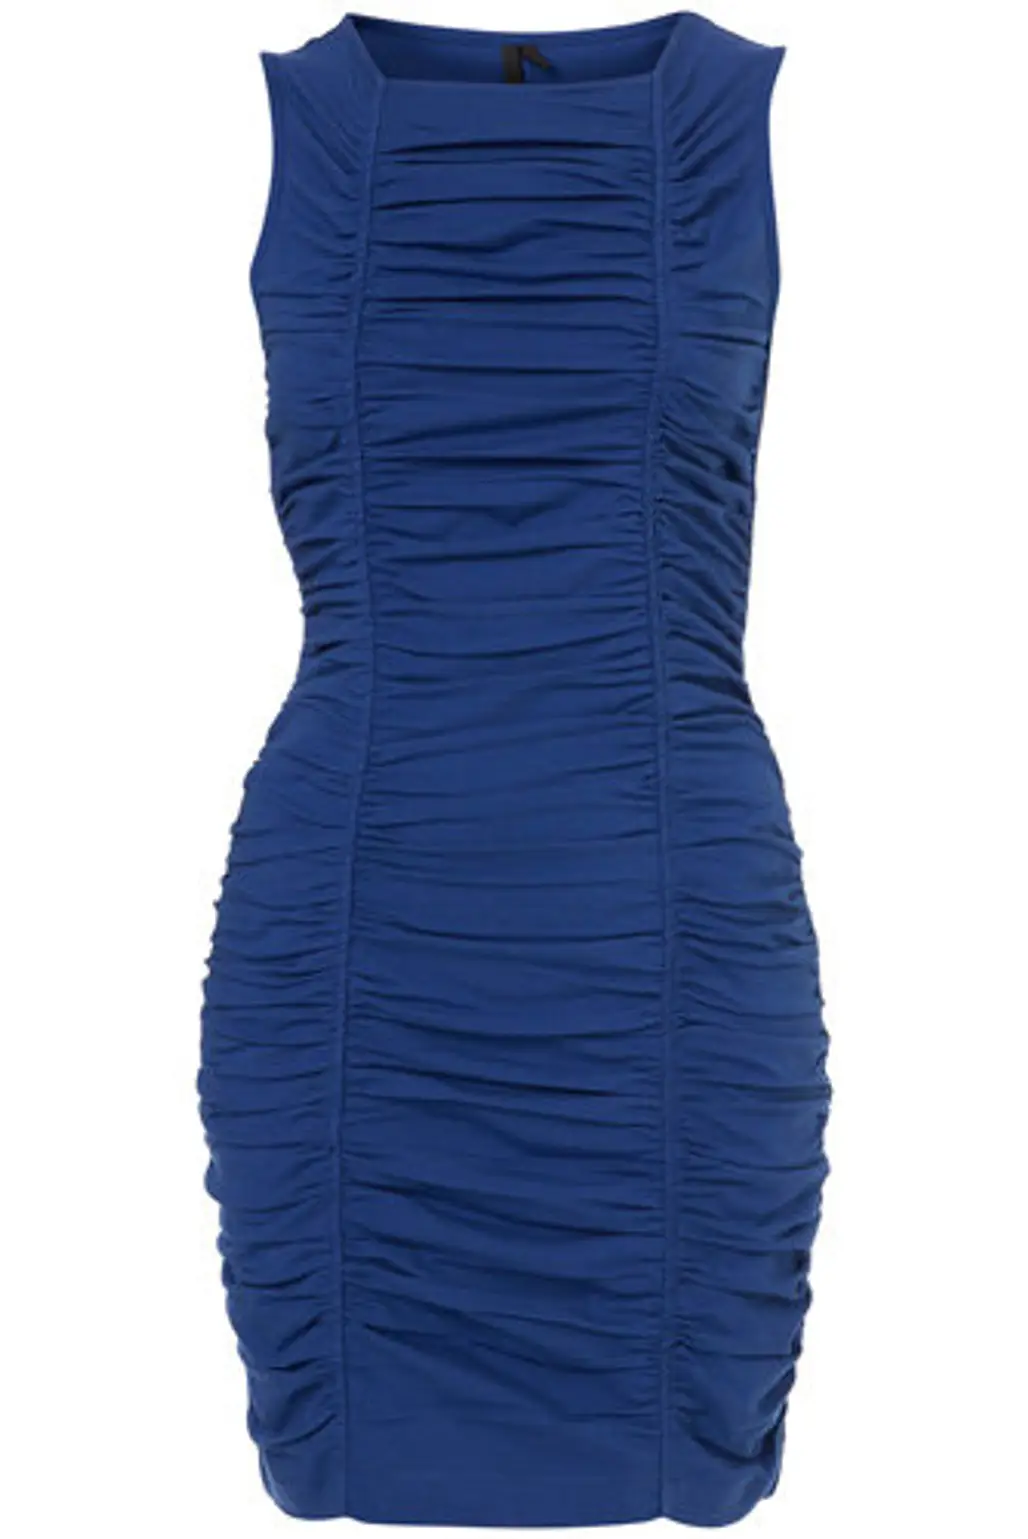 Topshop Bright Blue Ruched Bodycon Dress